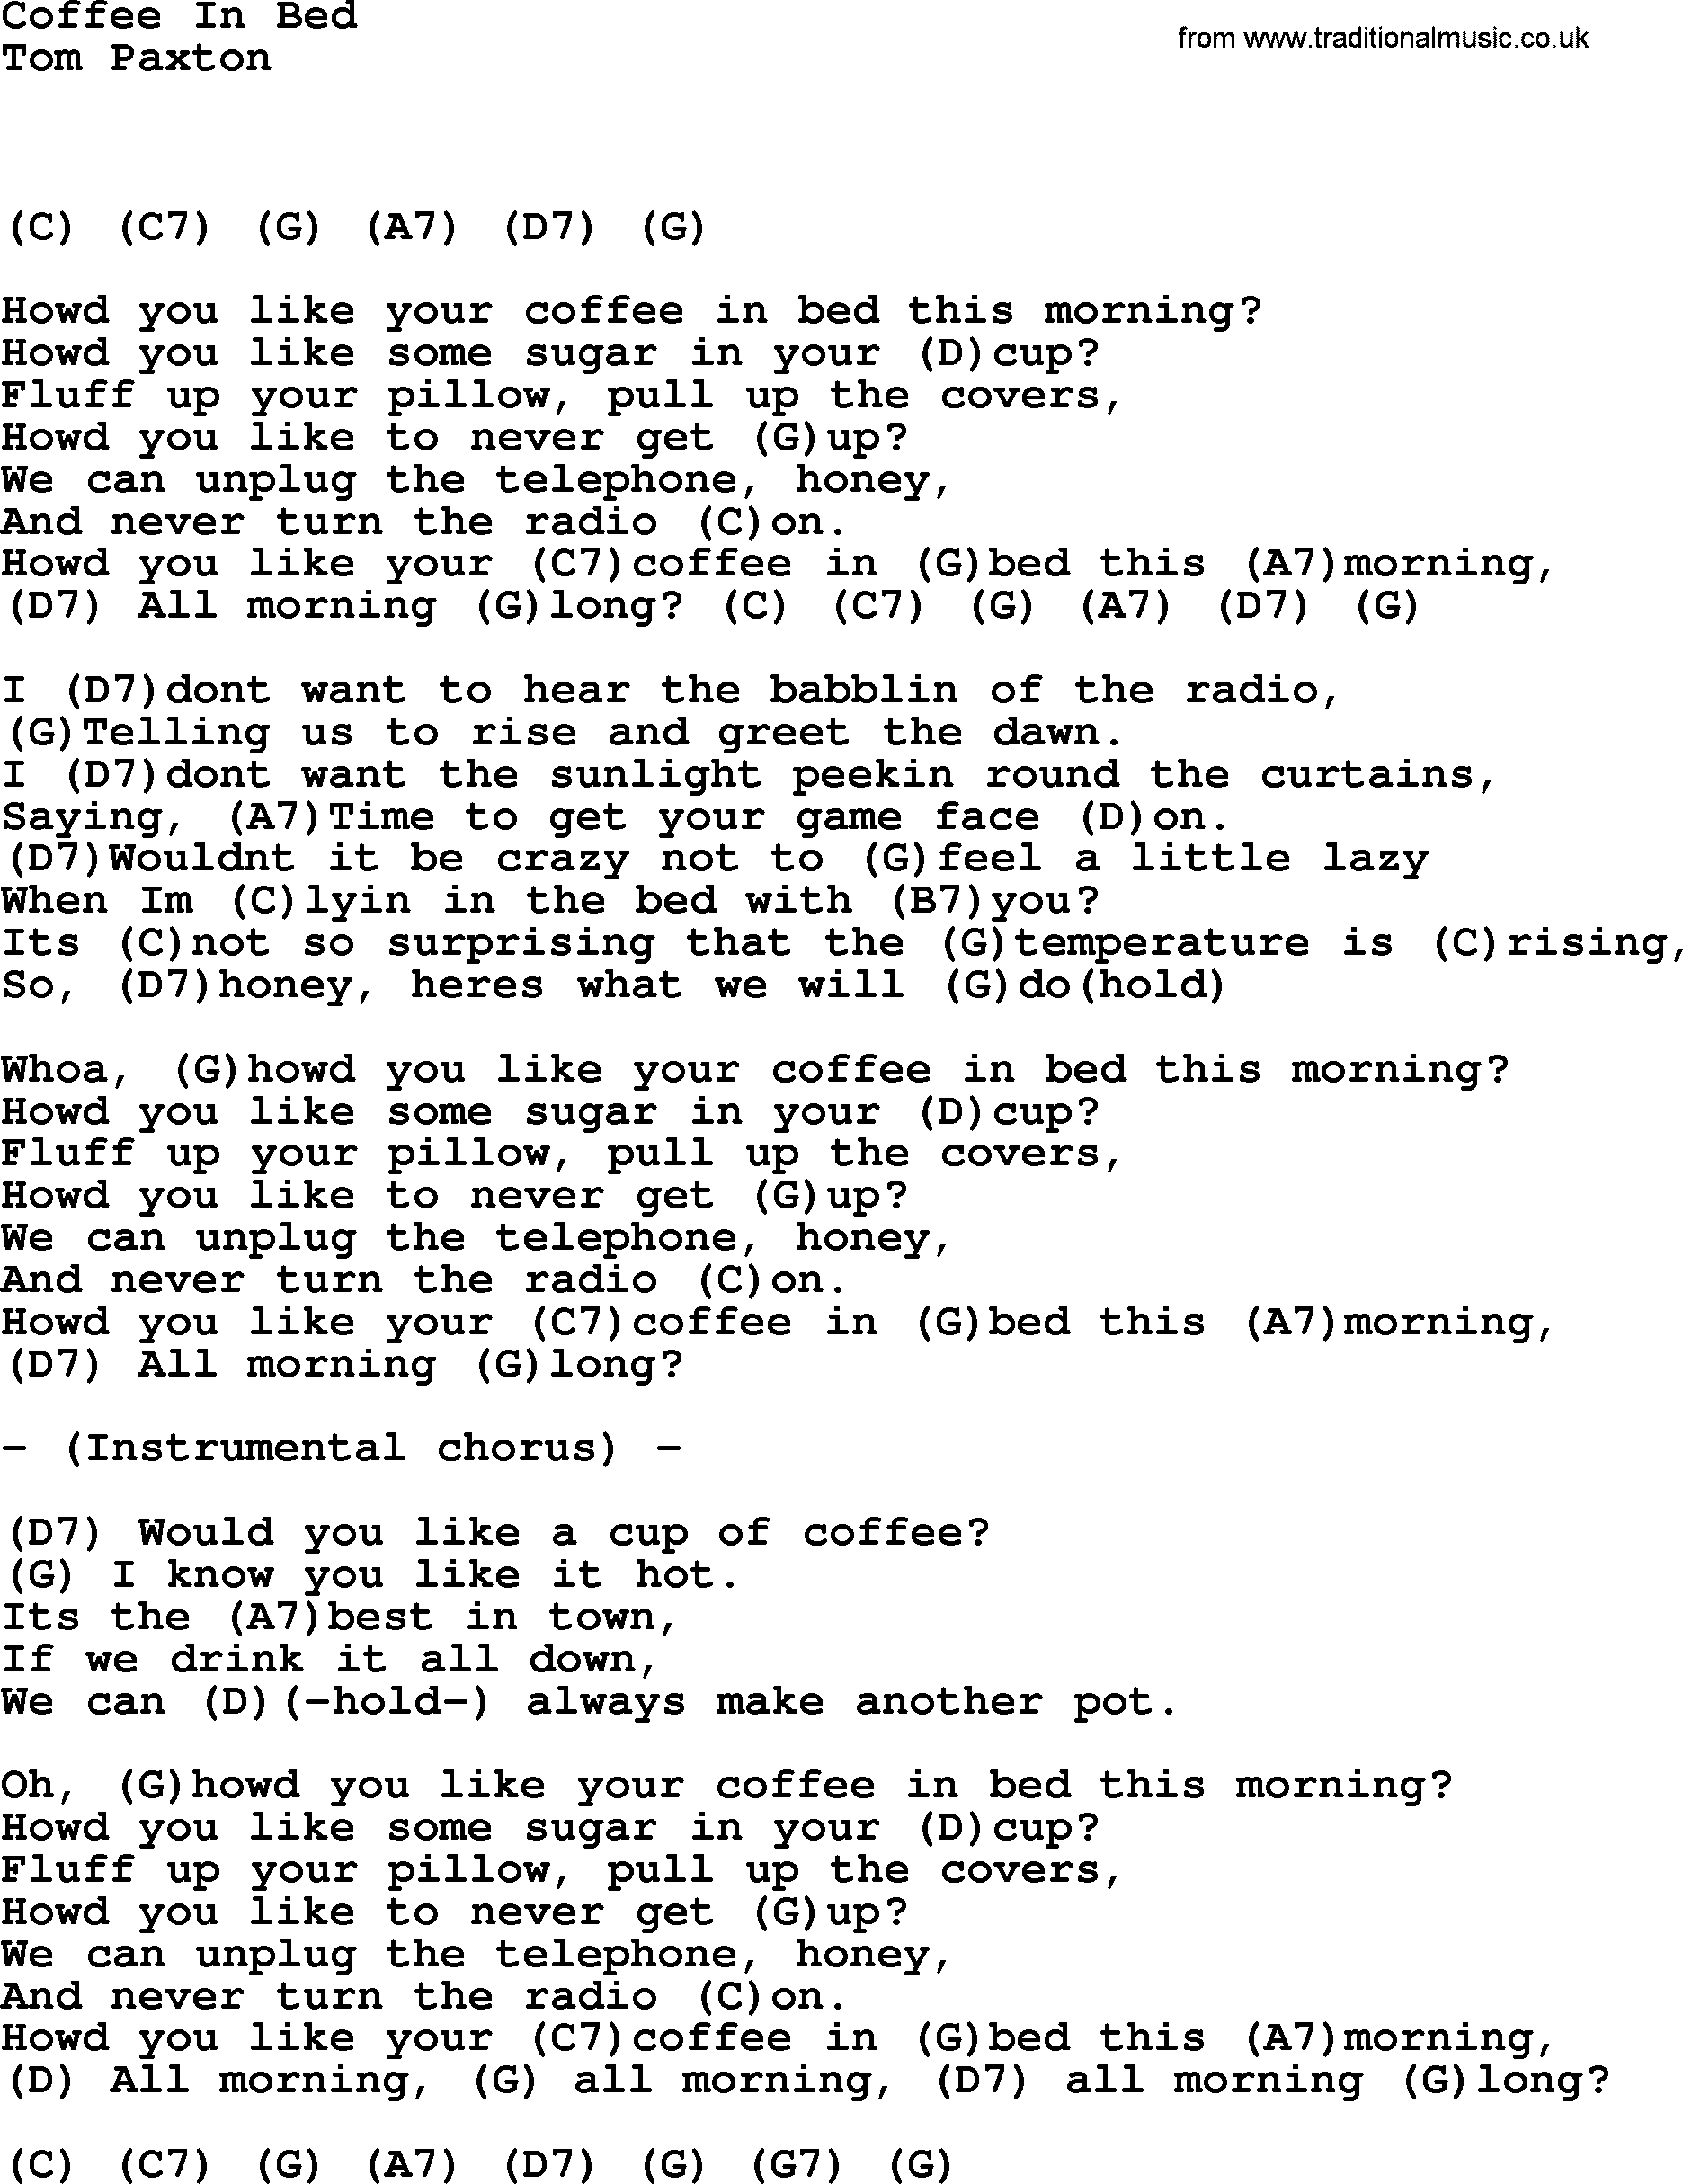 Tom Paxton song: Coffee In Bed, lyrics and chords